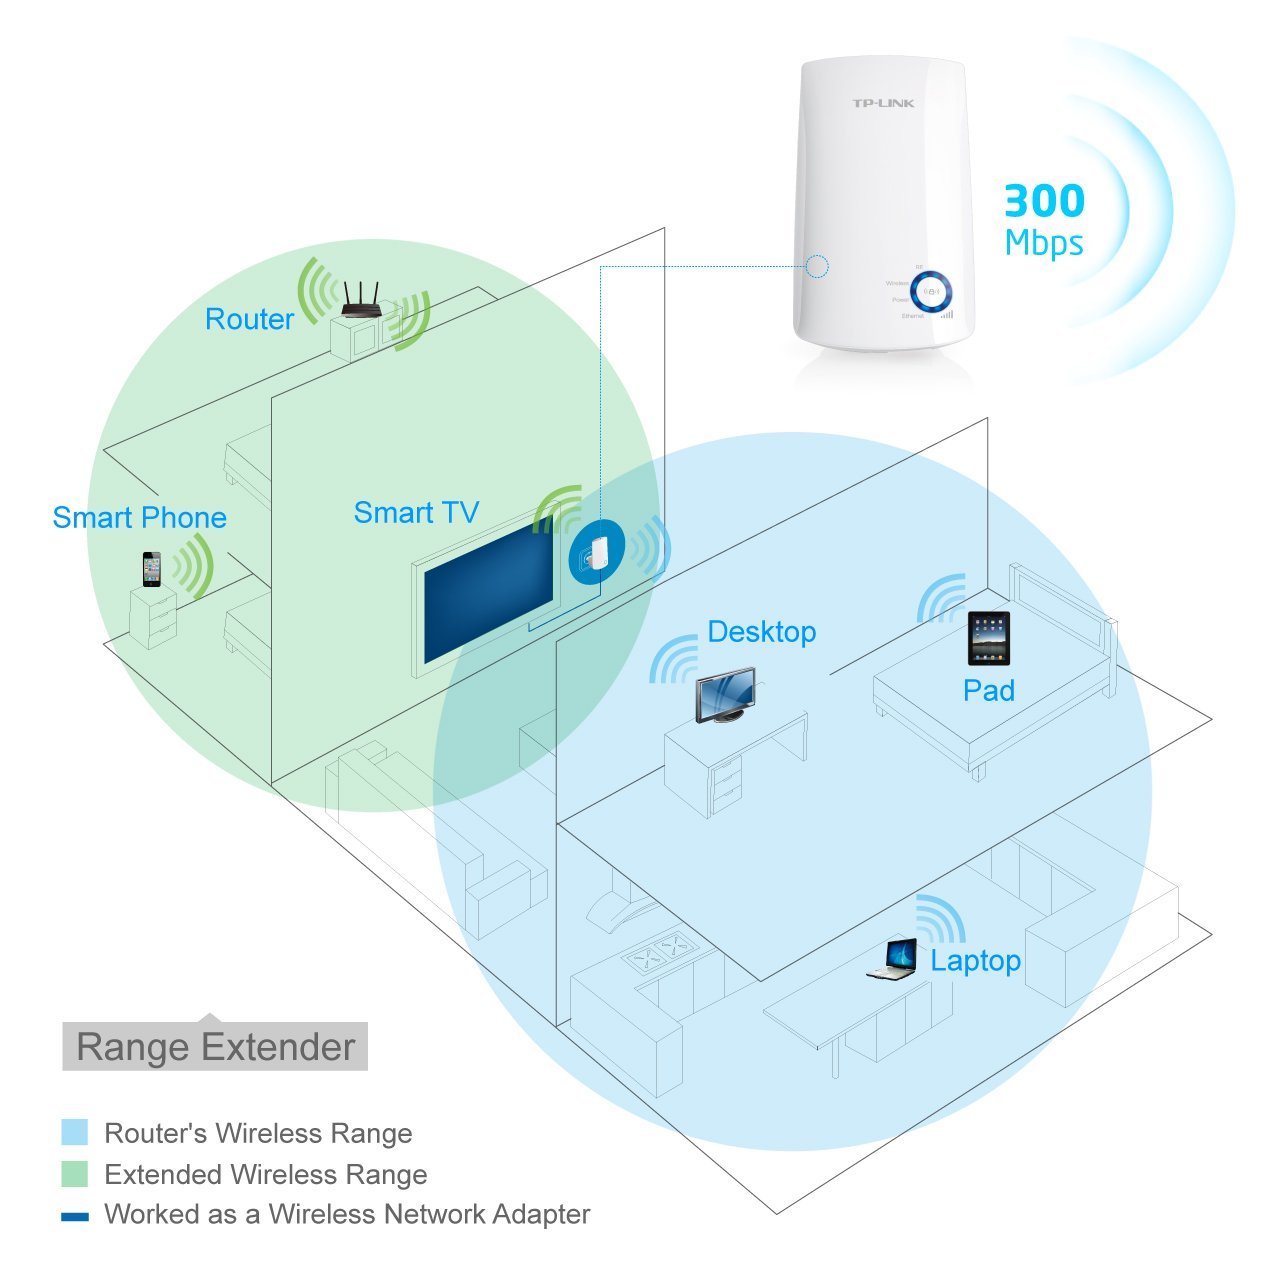 Smart Wi-Fi Routers